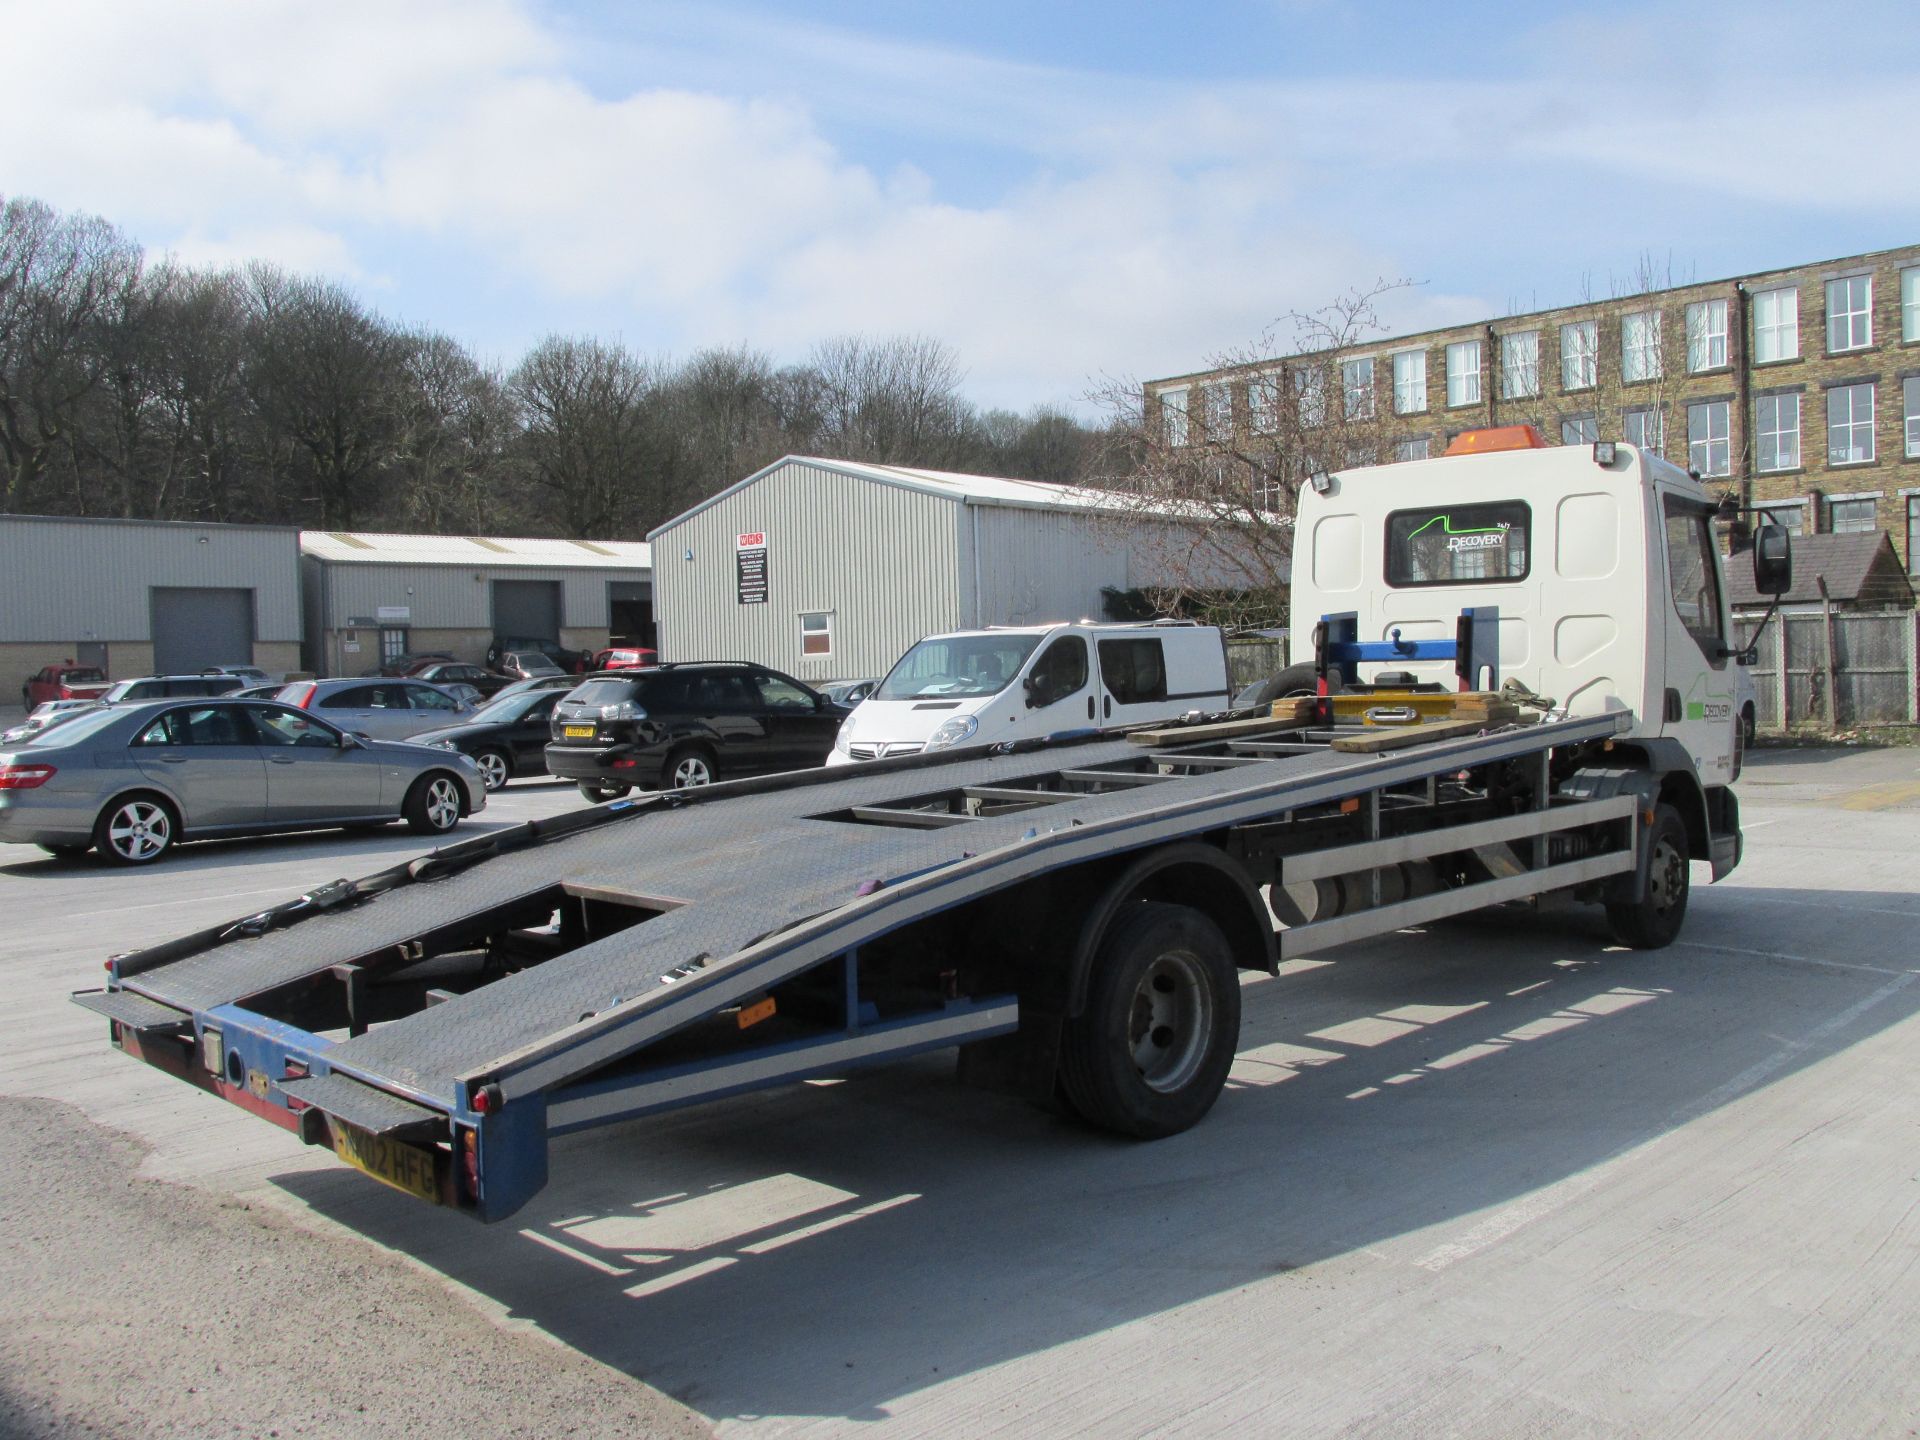 DAF LF45 7.5 Tonne Roger Dyson Car Transporter / Recovery Vehicle - Image 2 of 10